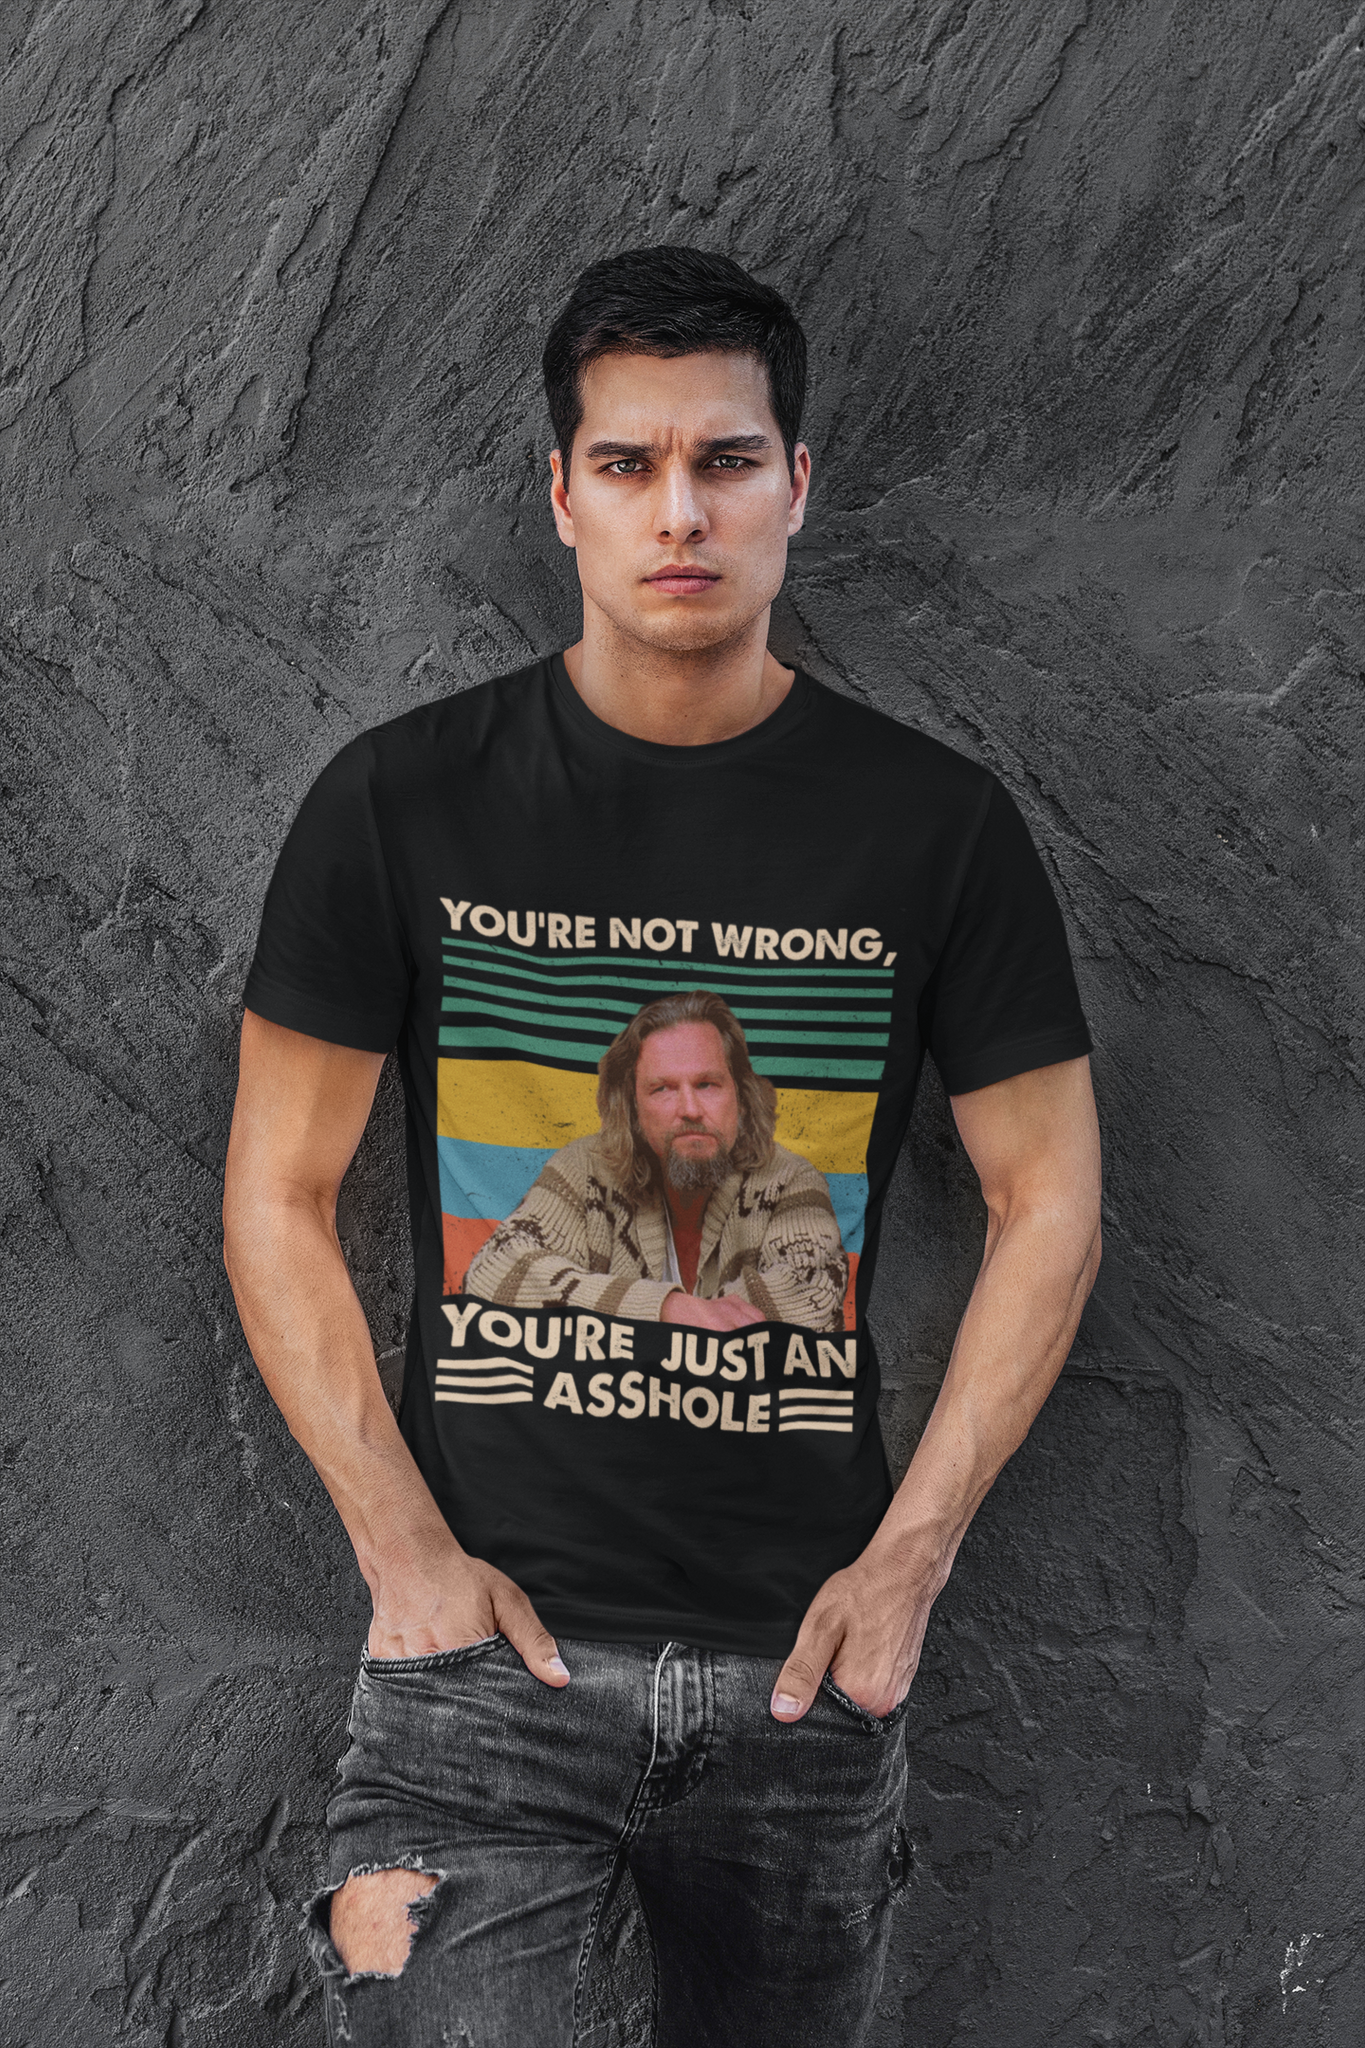 The Big Lebowski Vintage T Shirt, Youre Not Wrong Youre Just An Asshole Tshirt, The Dude T Shirt